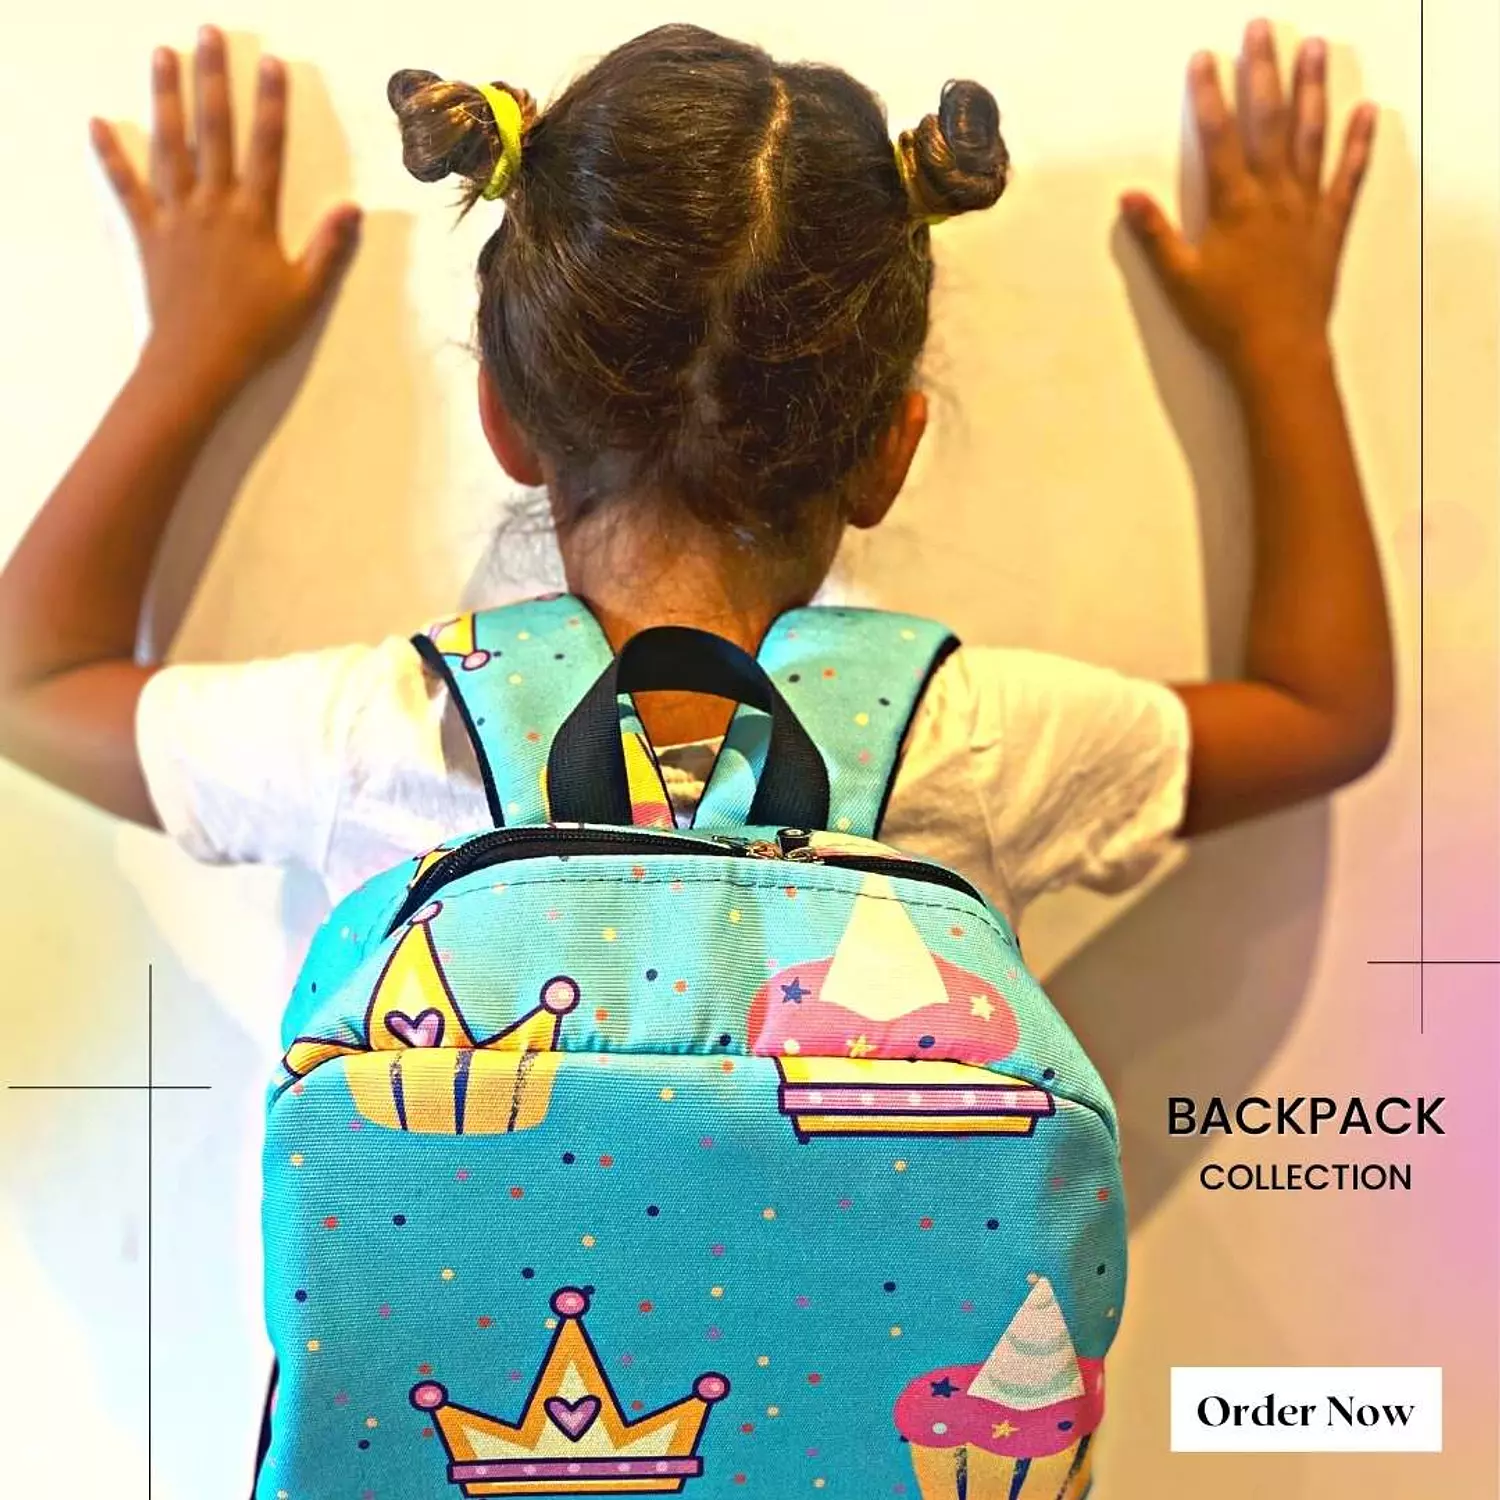 The Cupcake Design Backpack hover image